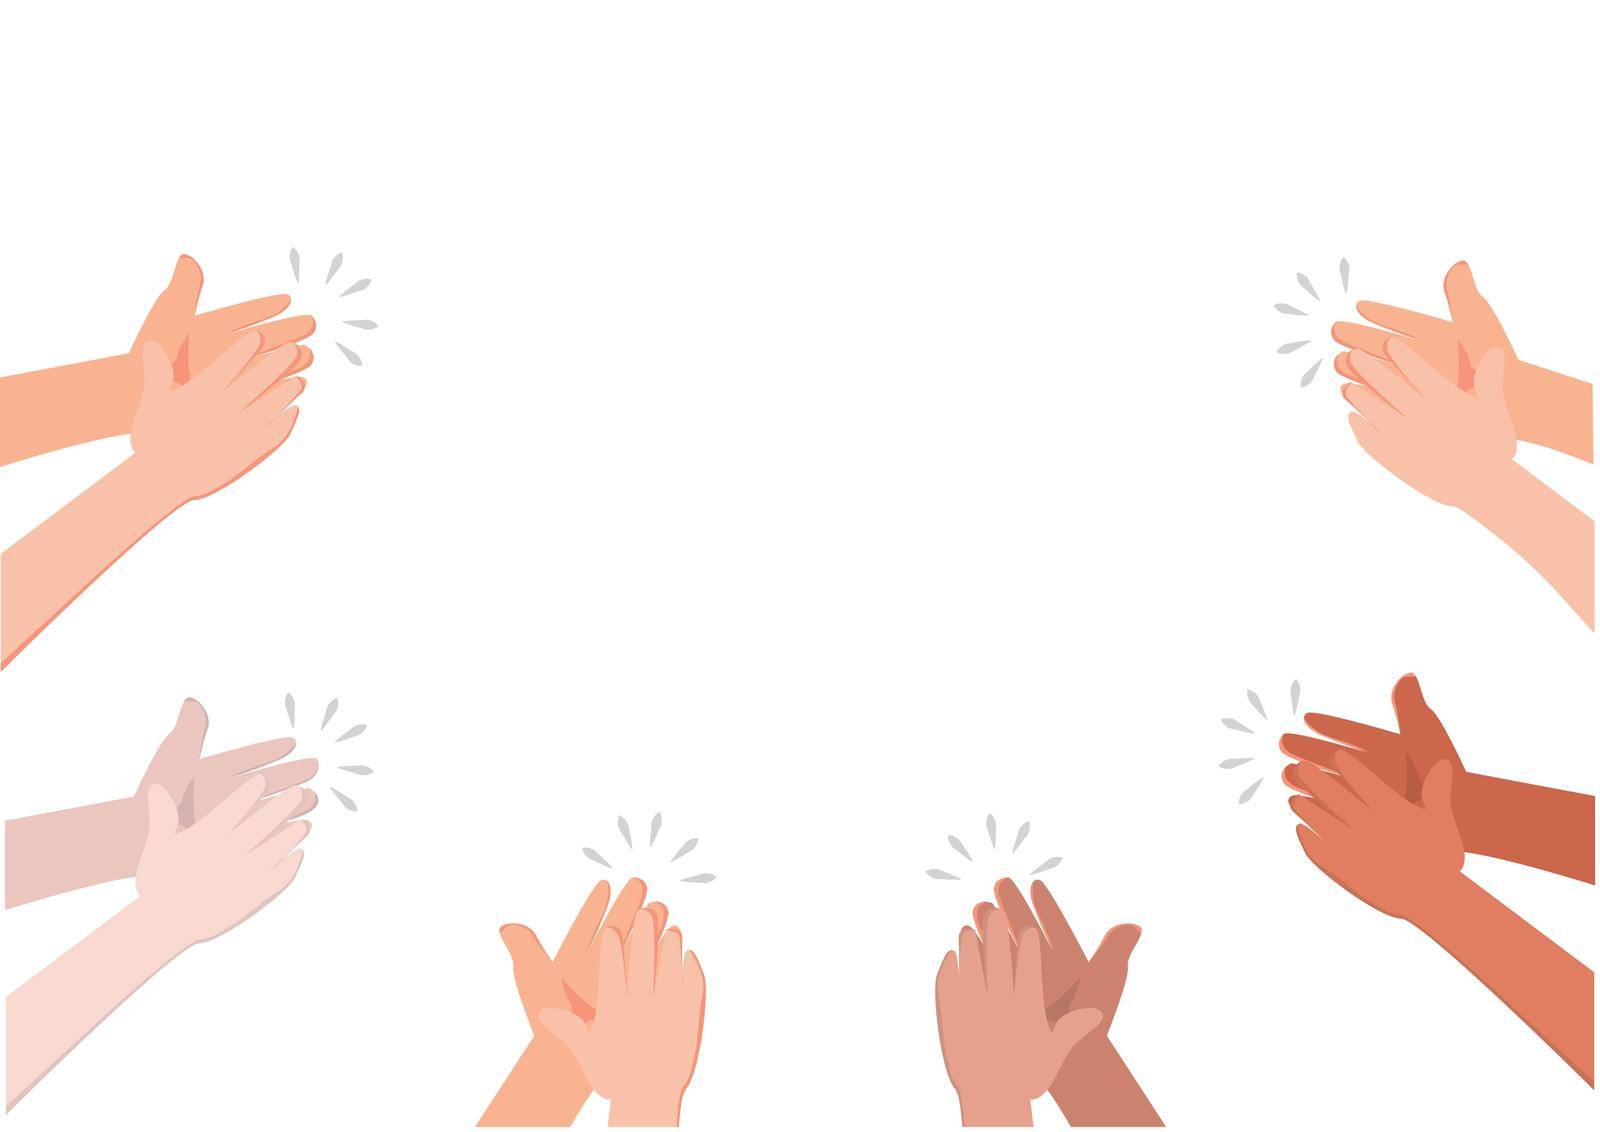 Applause of group of people. Hands clap. Congratulations, cheering, thanksgiving, thanks. Flat style cartoon illustration vector 